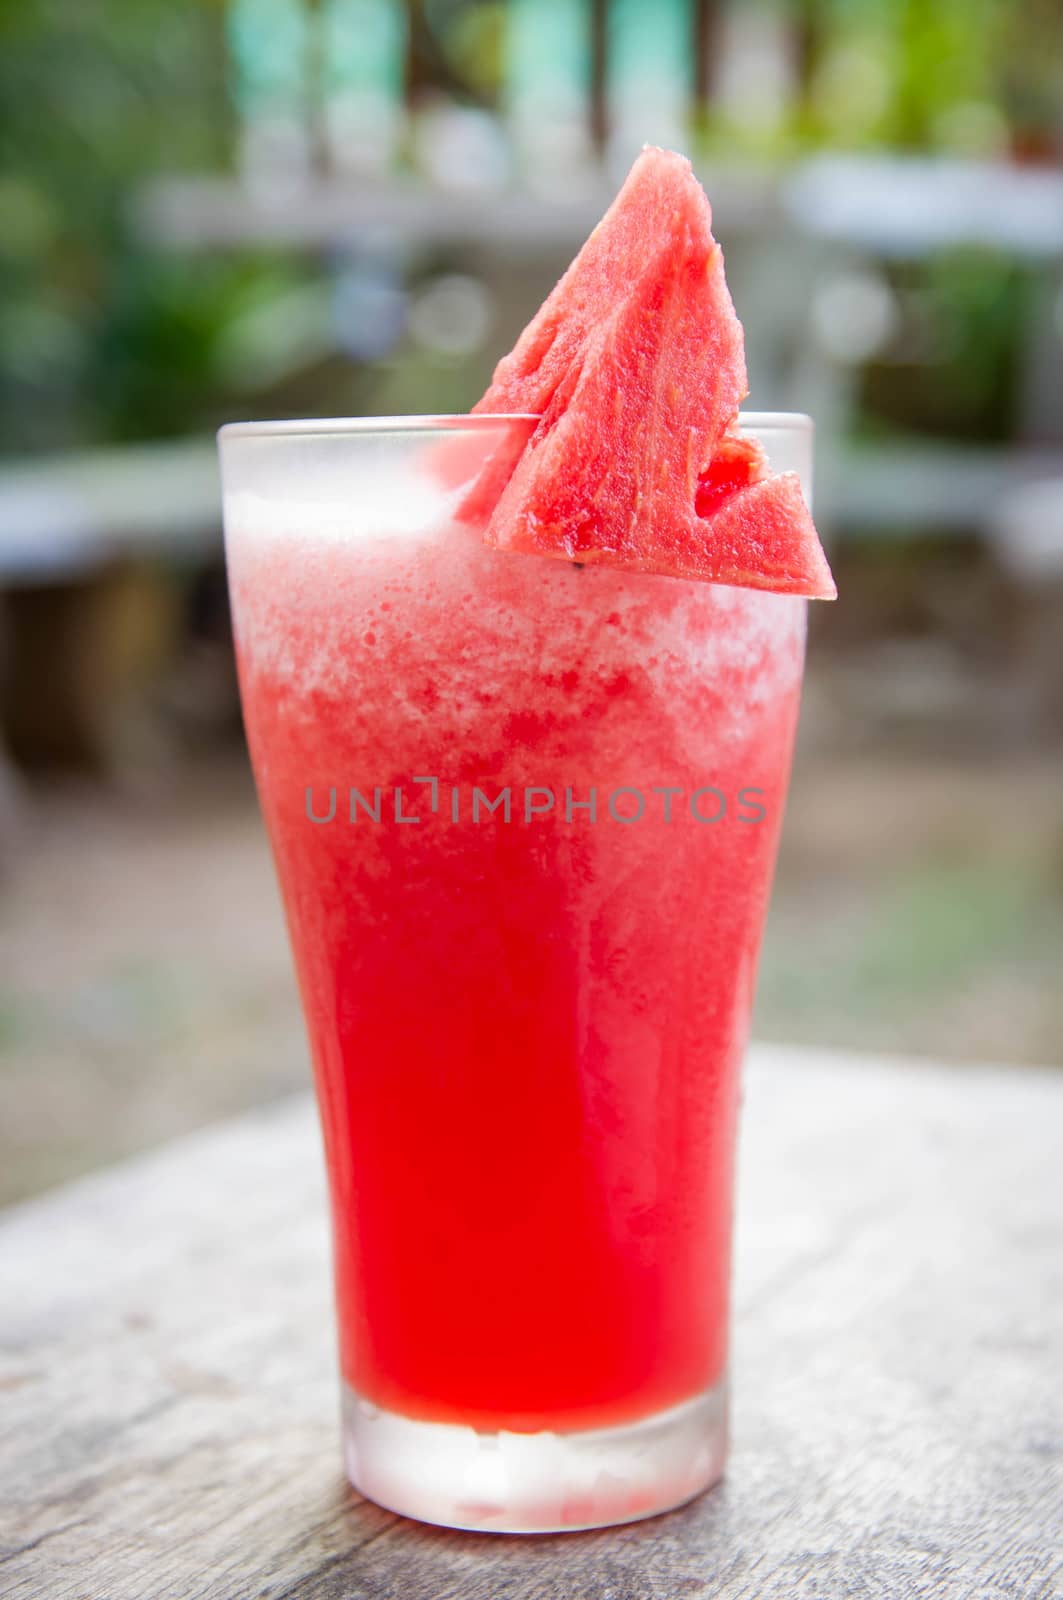 Smoothie water melon with slice water melon by seksan44